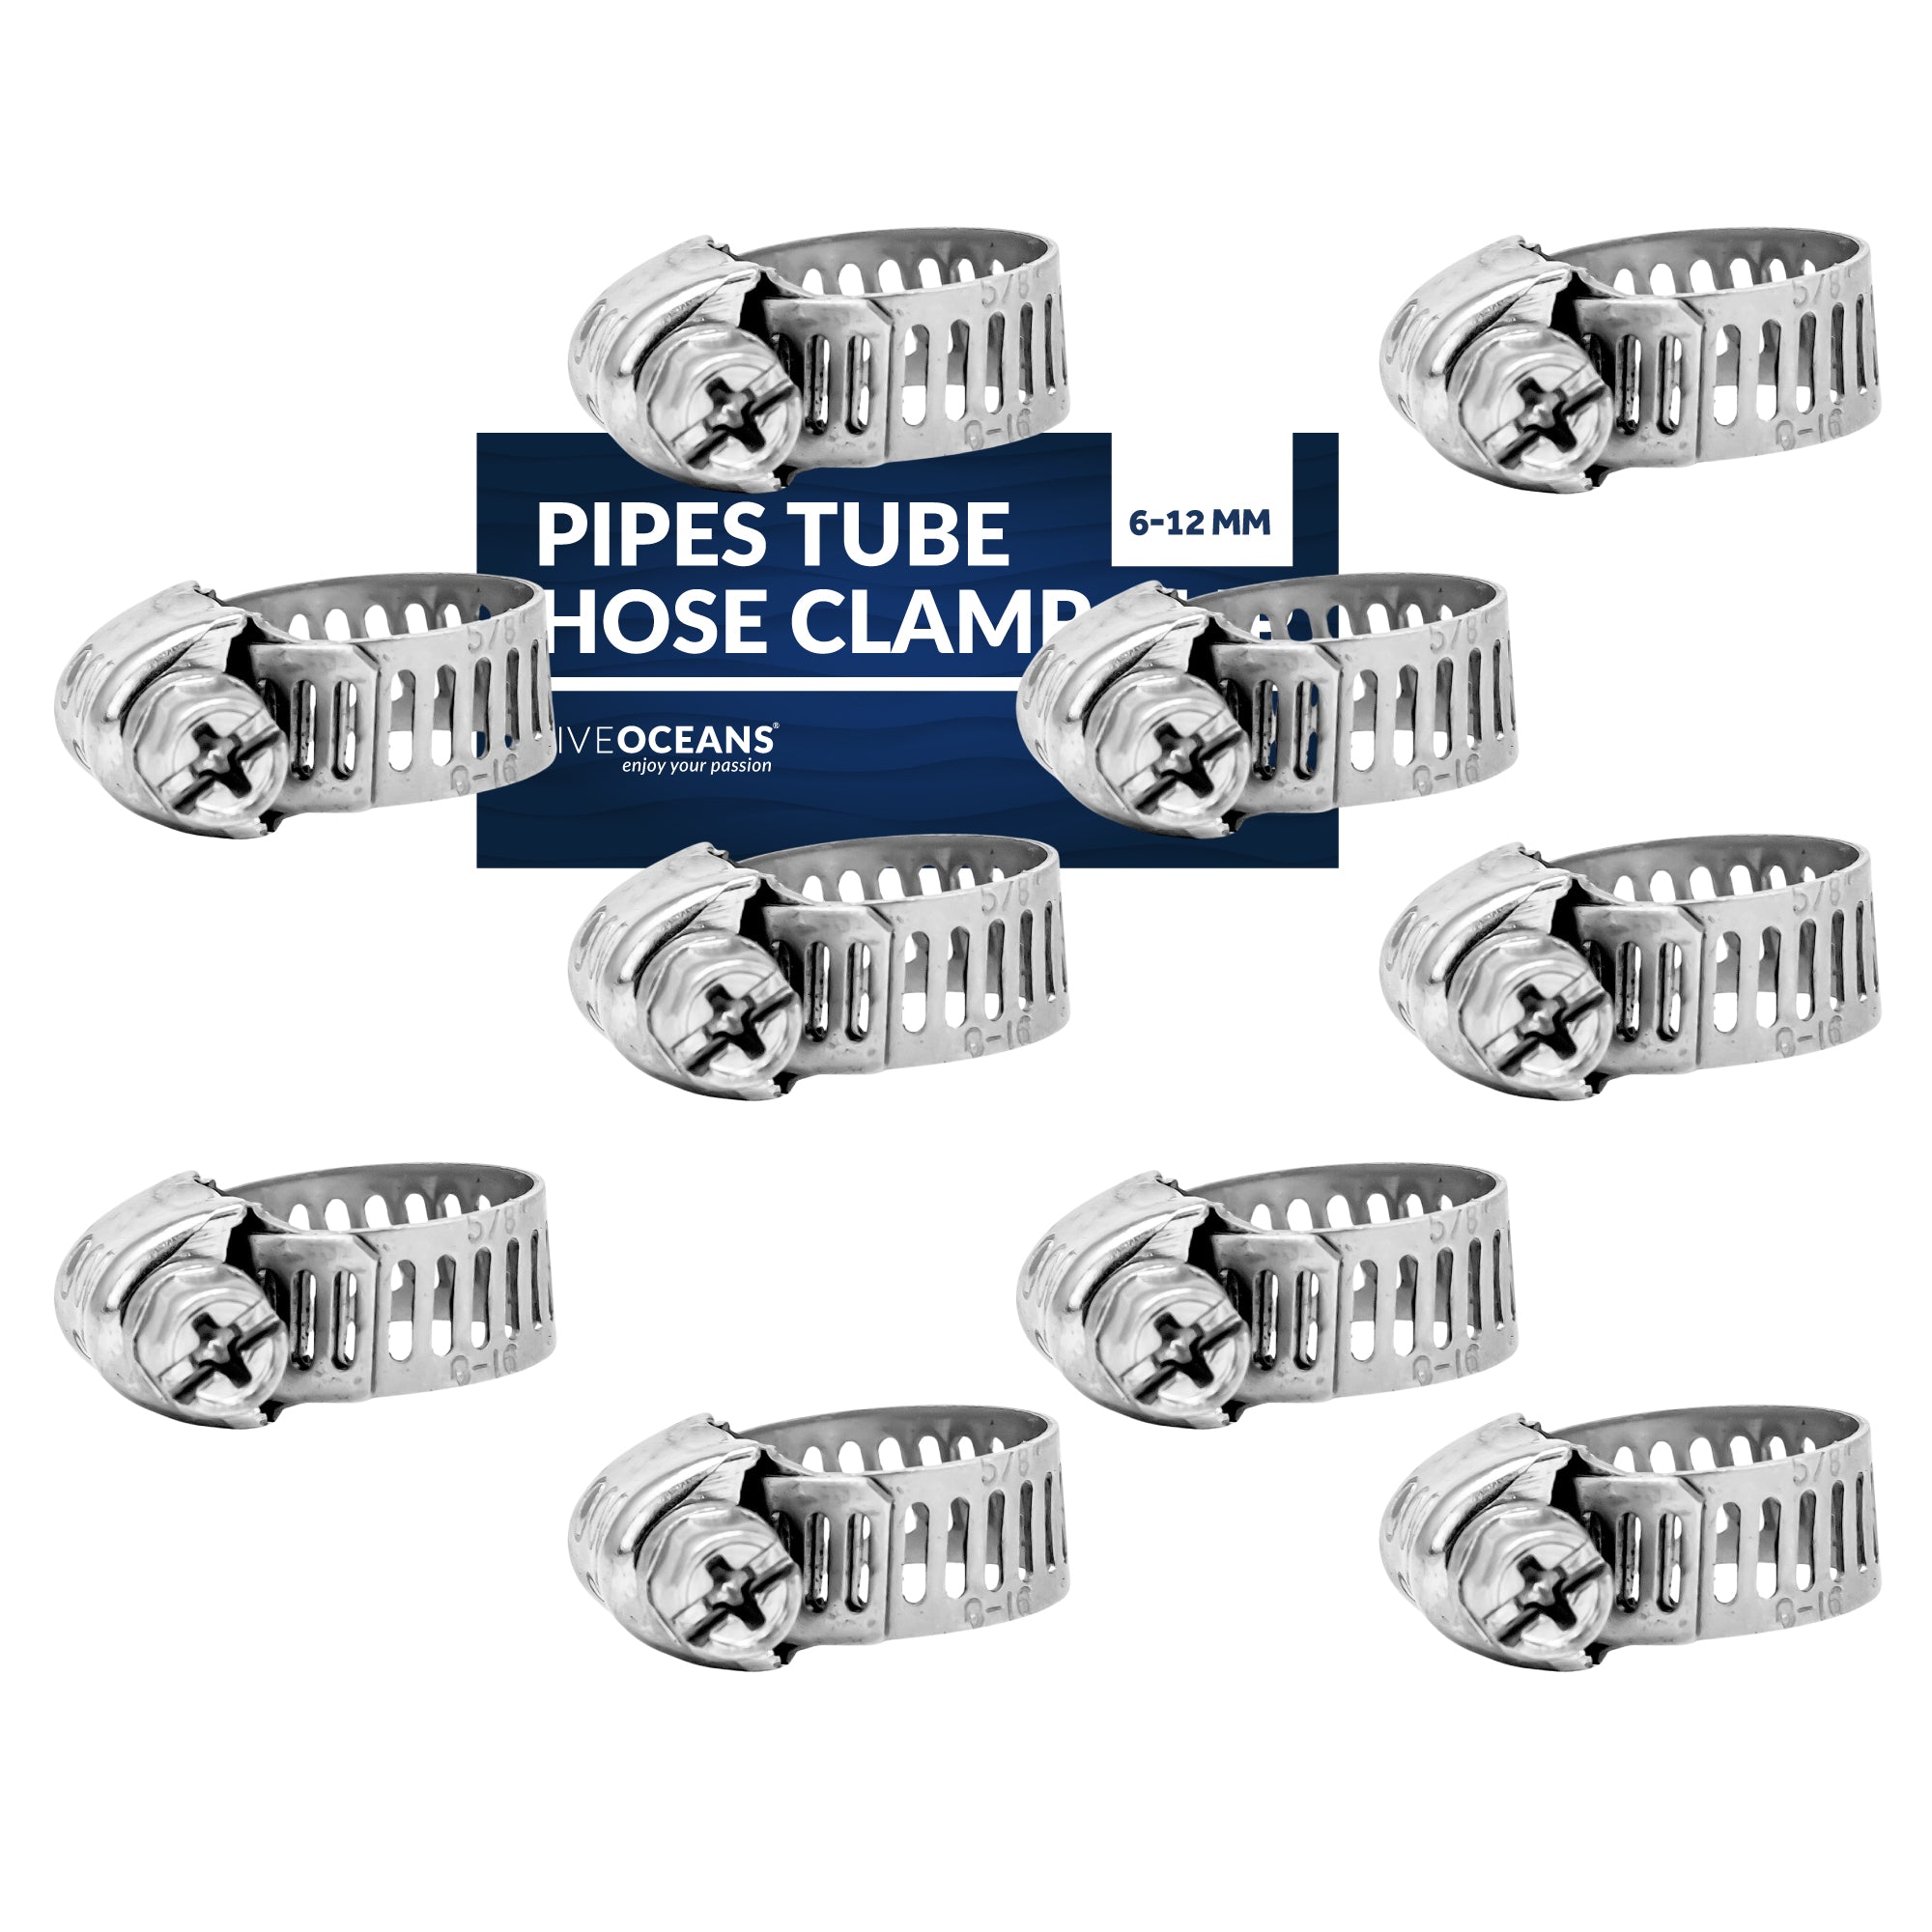 Hose Clamp 6 -12mm (1/4-Inch - 1/2-Inch), Stainless Steel - 10-Pack - FO2325-M10